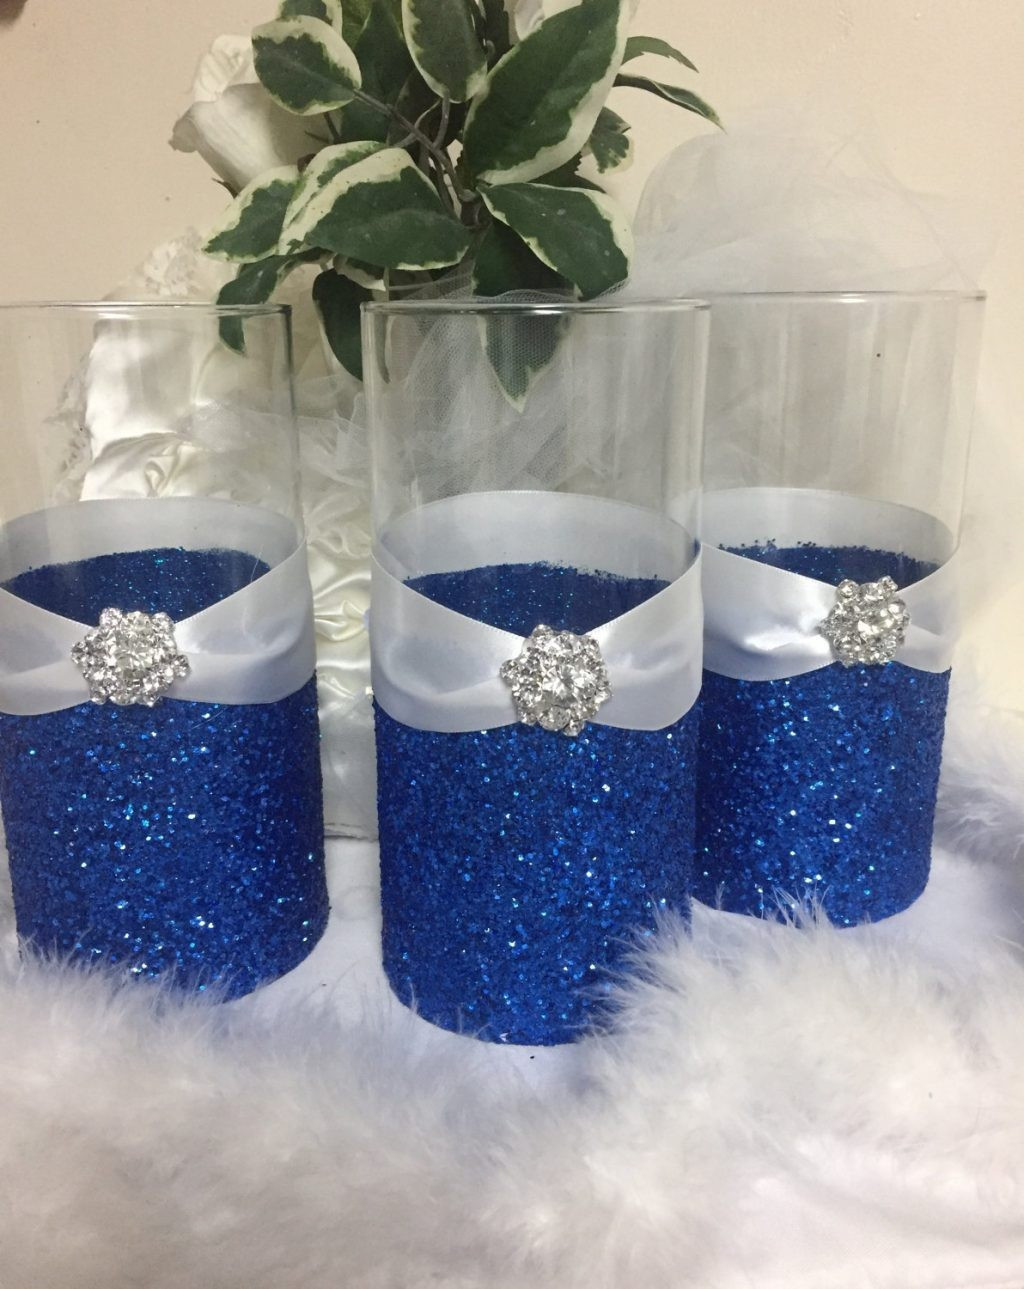 15 Lovable Crystal Flower Vases wholesale 2024 free download crystal flower vases wholesale of wedding decorations centerpieces beautiful tallh vases glitter vase with regard to wedding decorations centerpieces beautiful tallh vases glitter vase cente